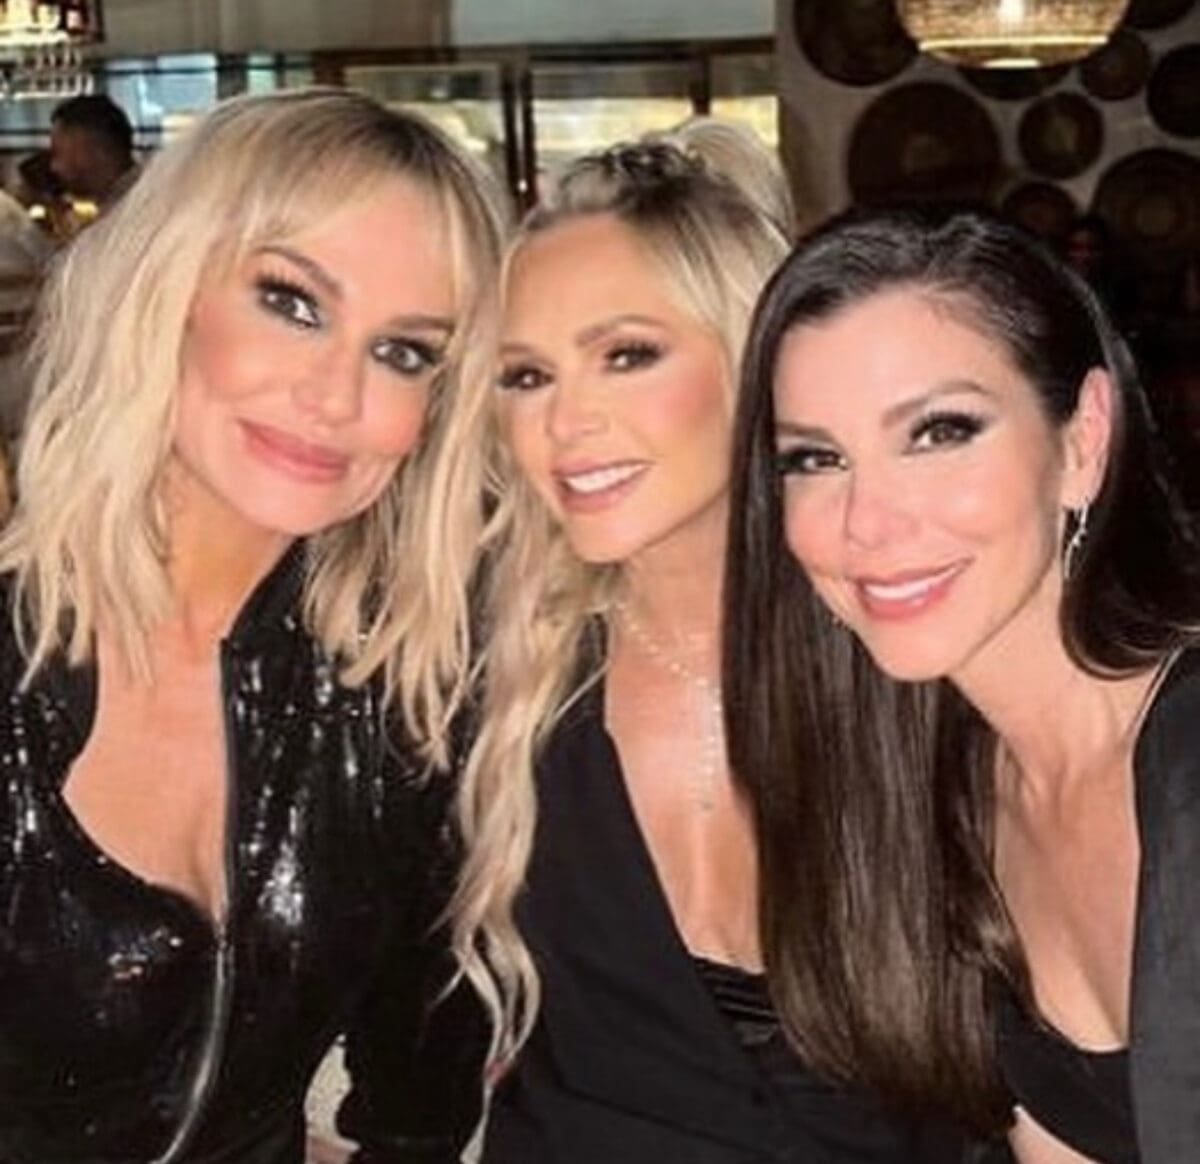 Heather Dubrow poses for a photo with Tamra Judge and Taylor Armstrong at RHOC season 17 reunion